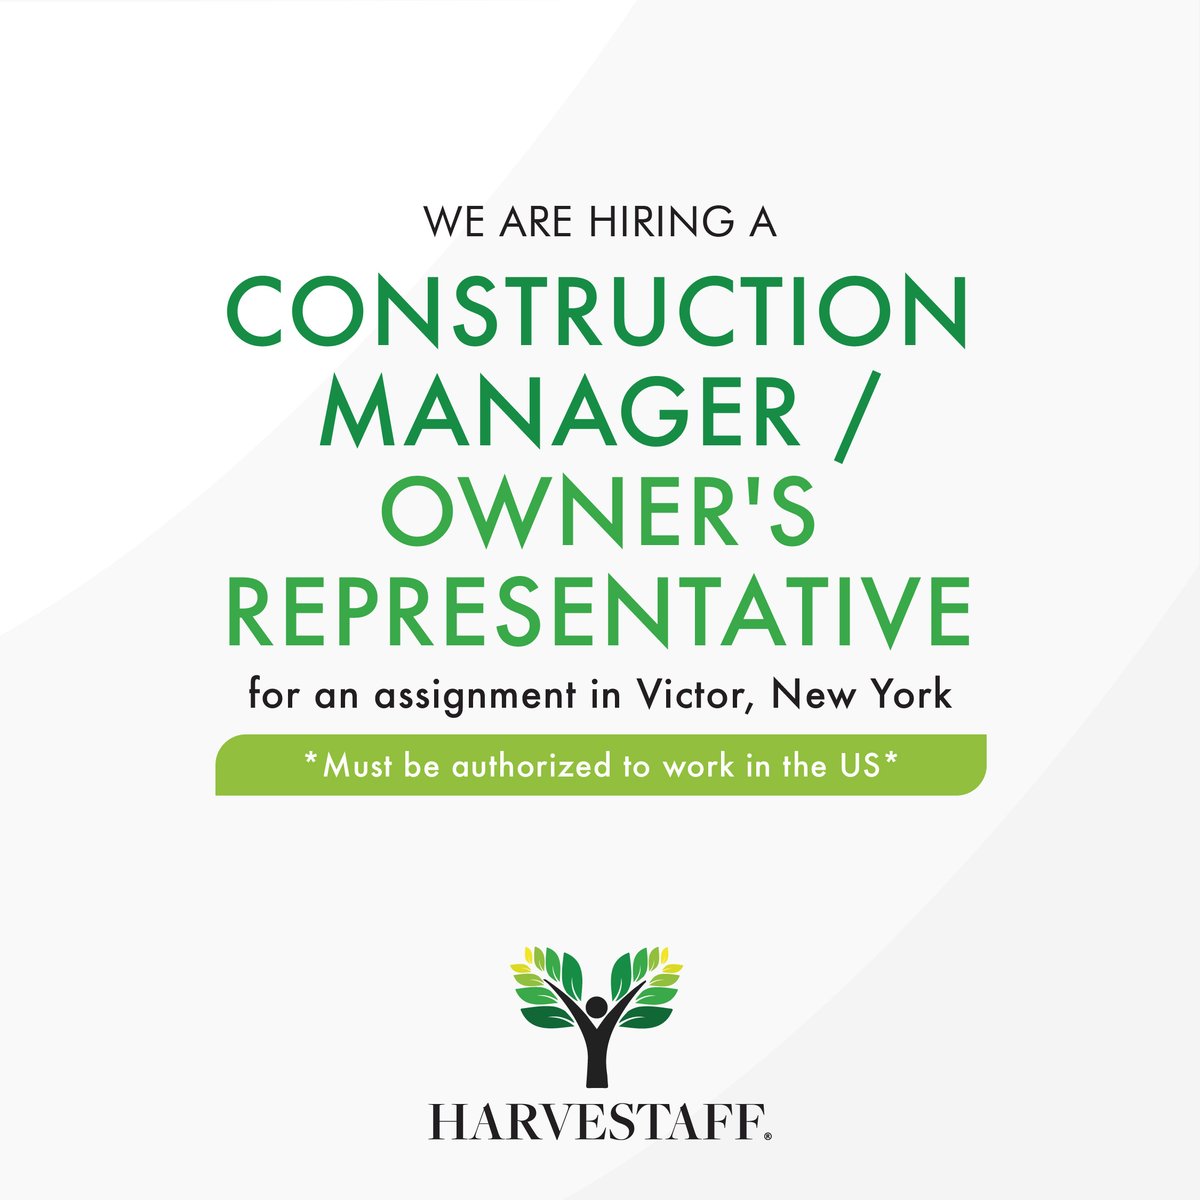 We are hiring an Construction Manager / Owner's Representative for an assignment in Victor, New York, to apply and for more information please visit the following link:

job.harvestaff.com/41749_Construc…

#ConstructionManager #Victor #Job #Jobs #HiringNow #JobAlert #Hiring #Vacancy